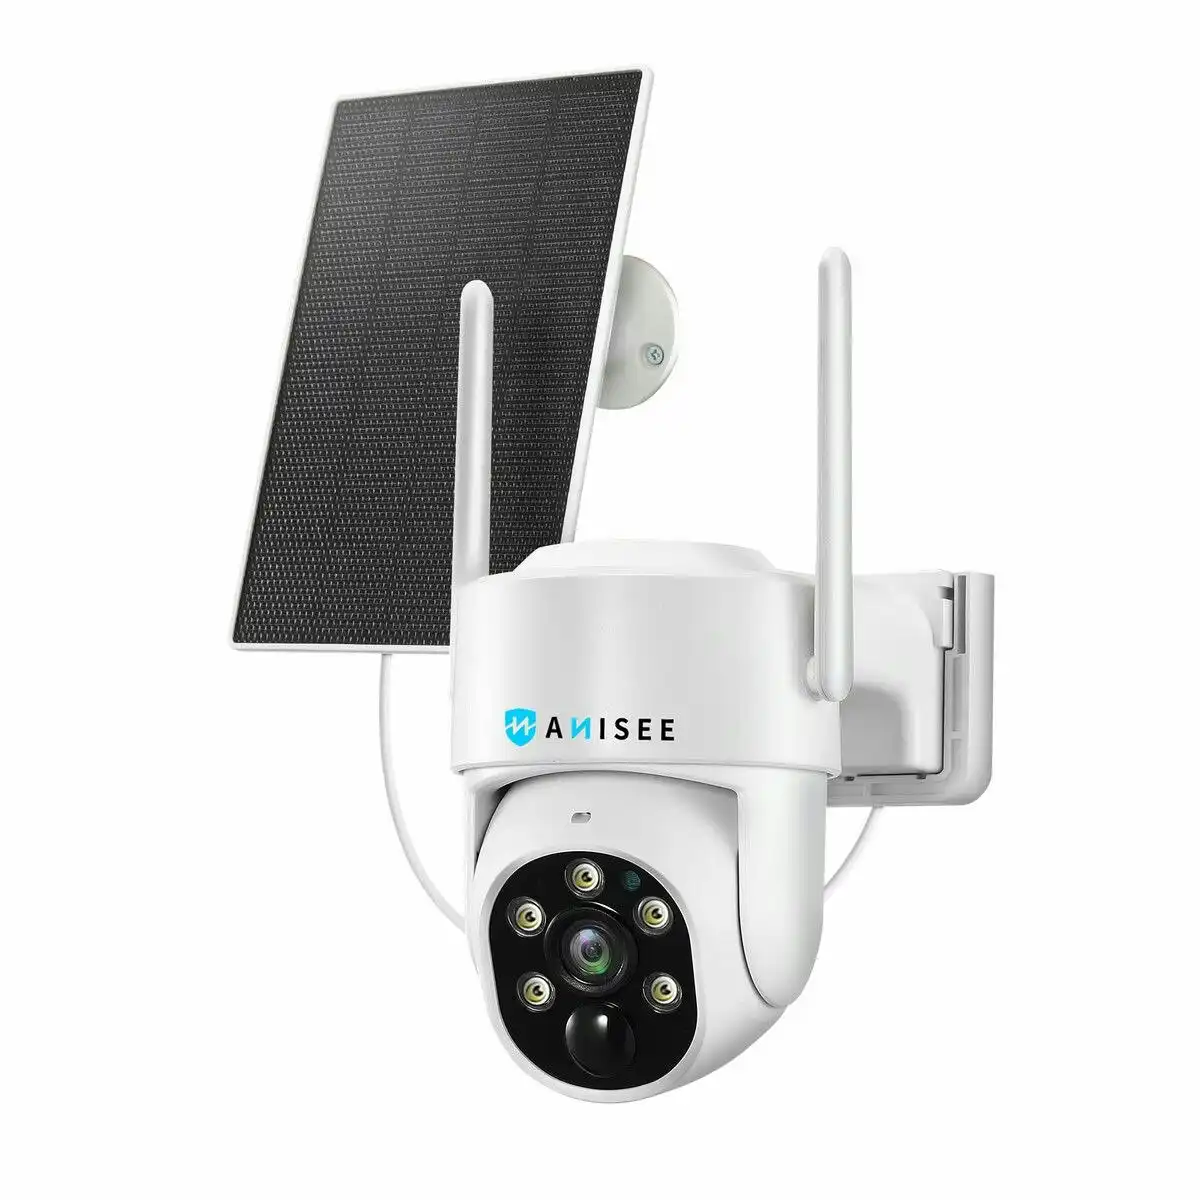 Anisee WiFi Security Camera CCTV Set Solar Wireless Home PTZ Outdoor Surveillance System 4MP Spy Waterproof Remote Channel